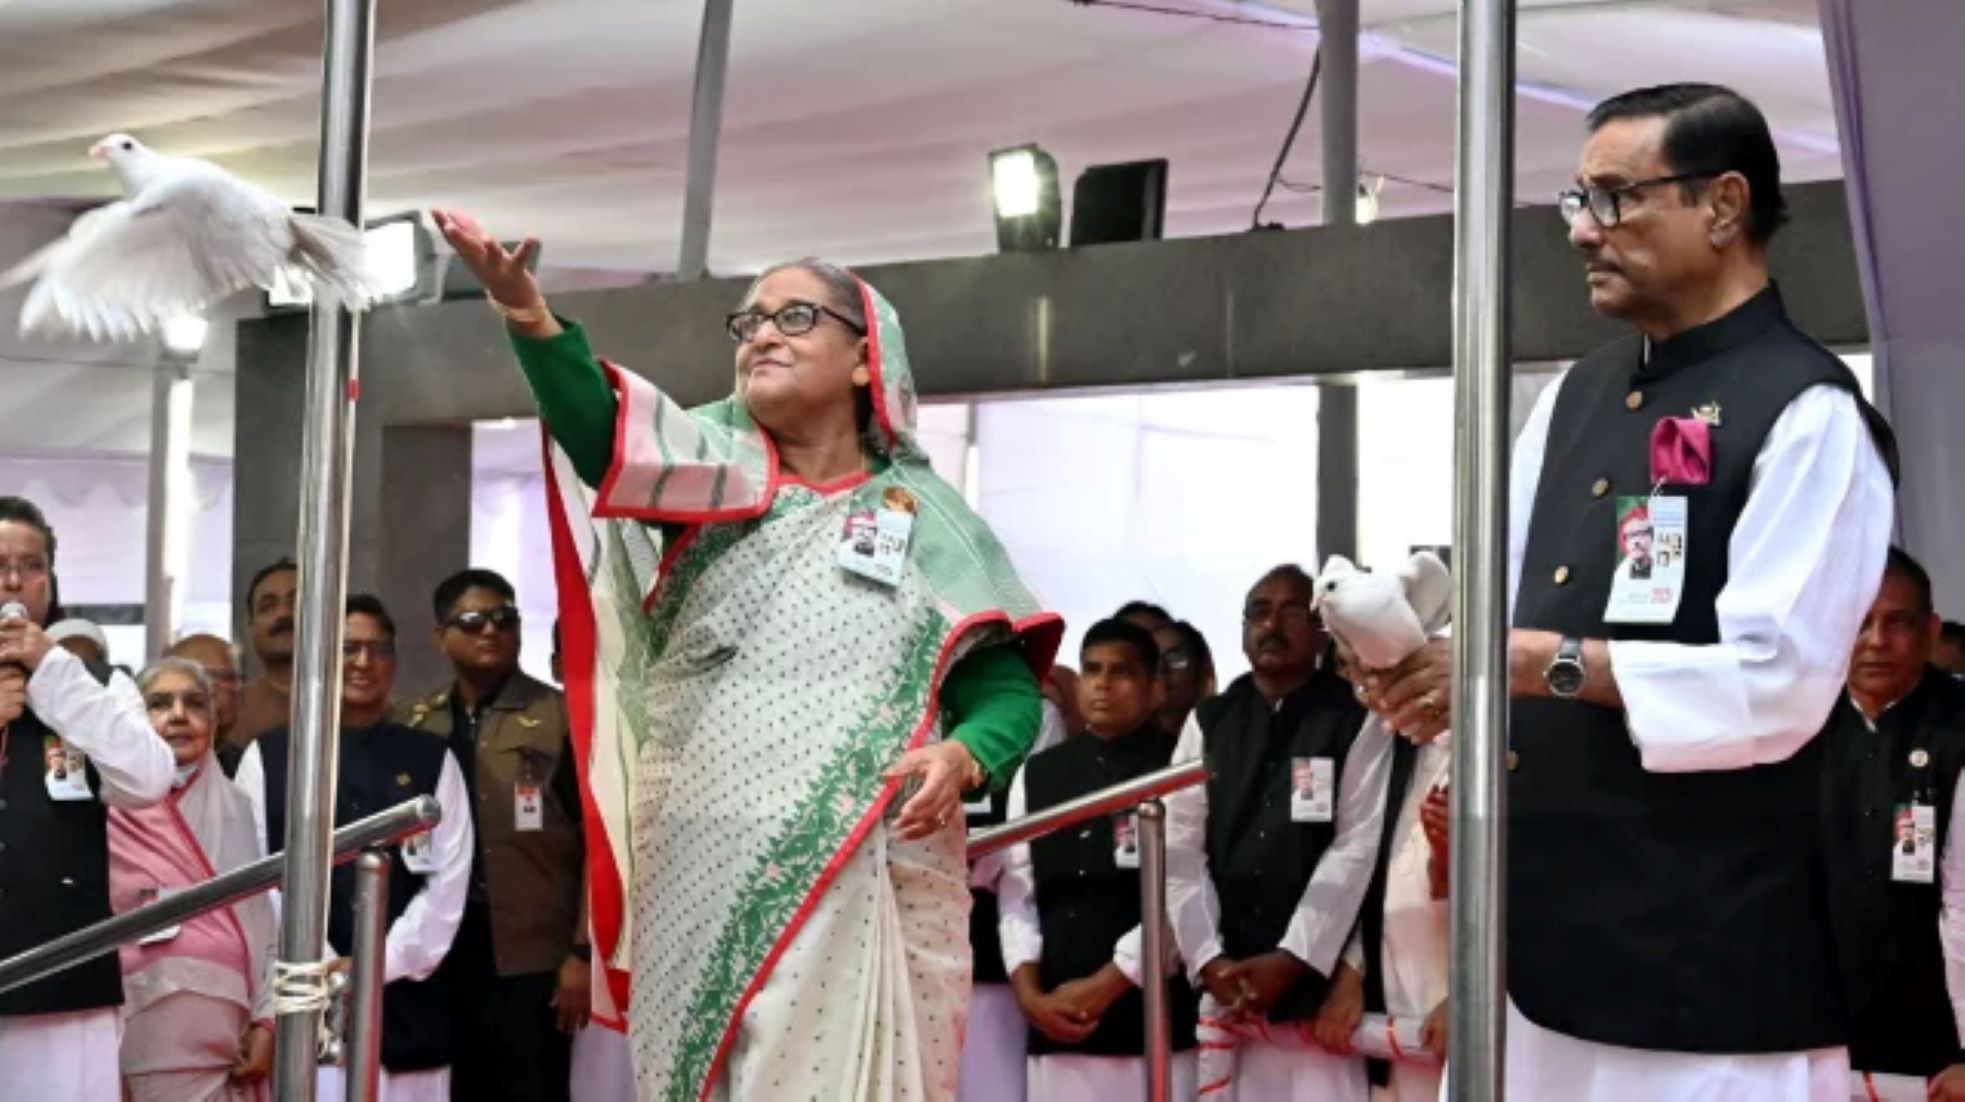 Bangladesh’s Ruling Awami League Party Celebrated 75th Anniversary